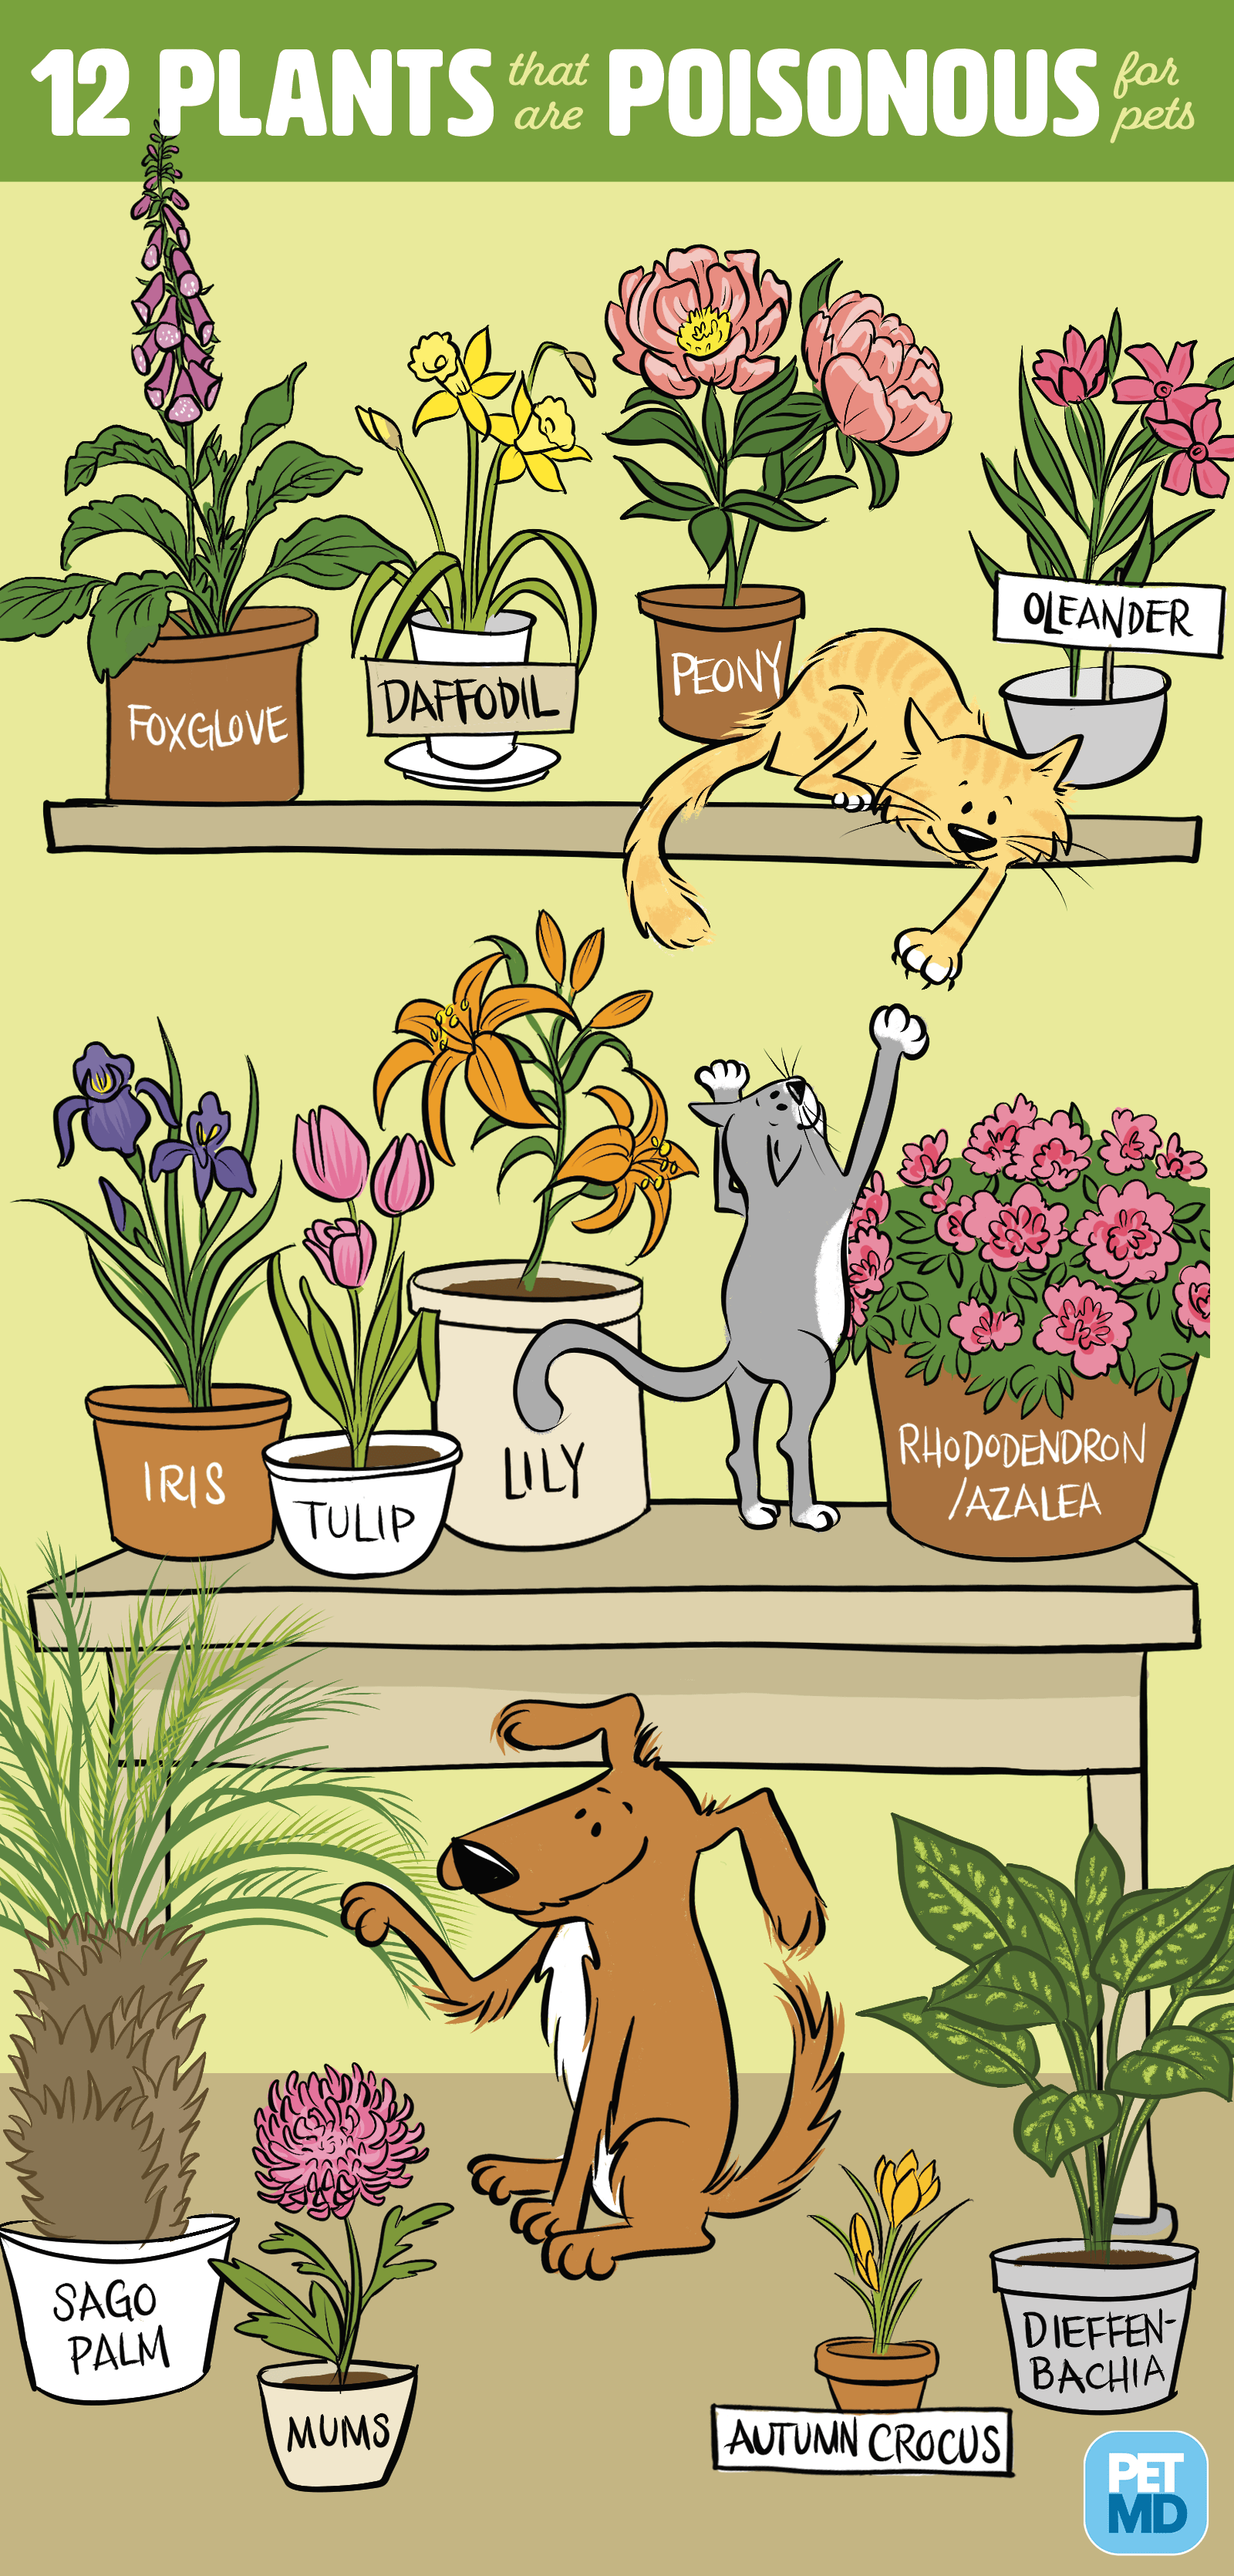 12 poisonous plants for dogs and cats